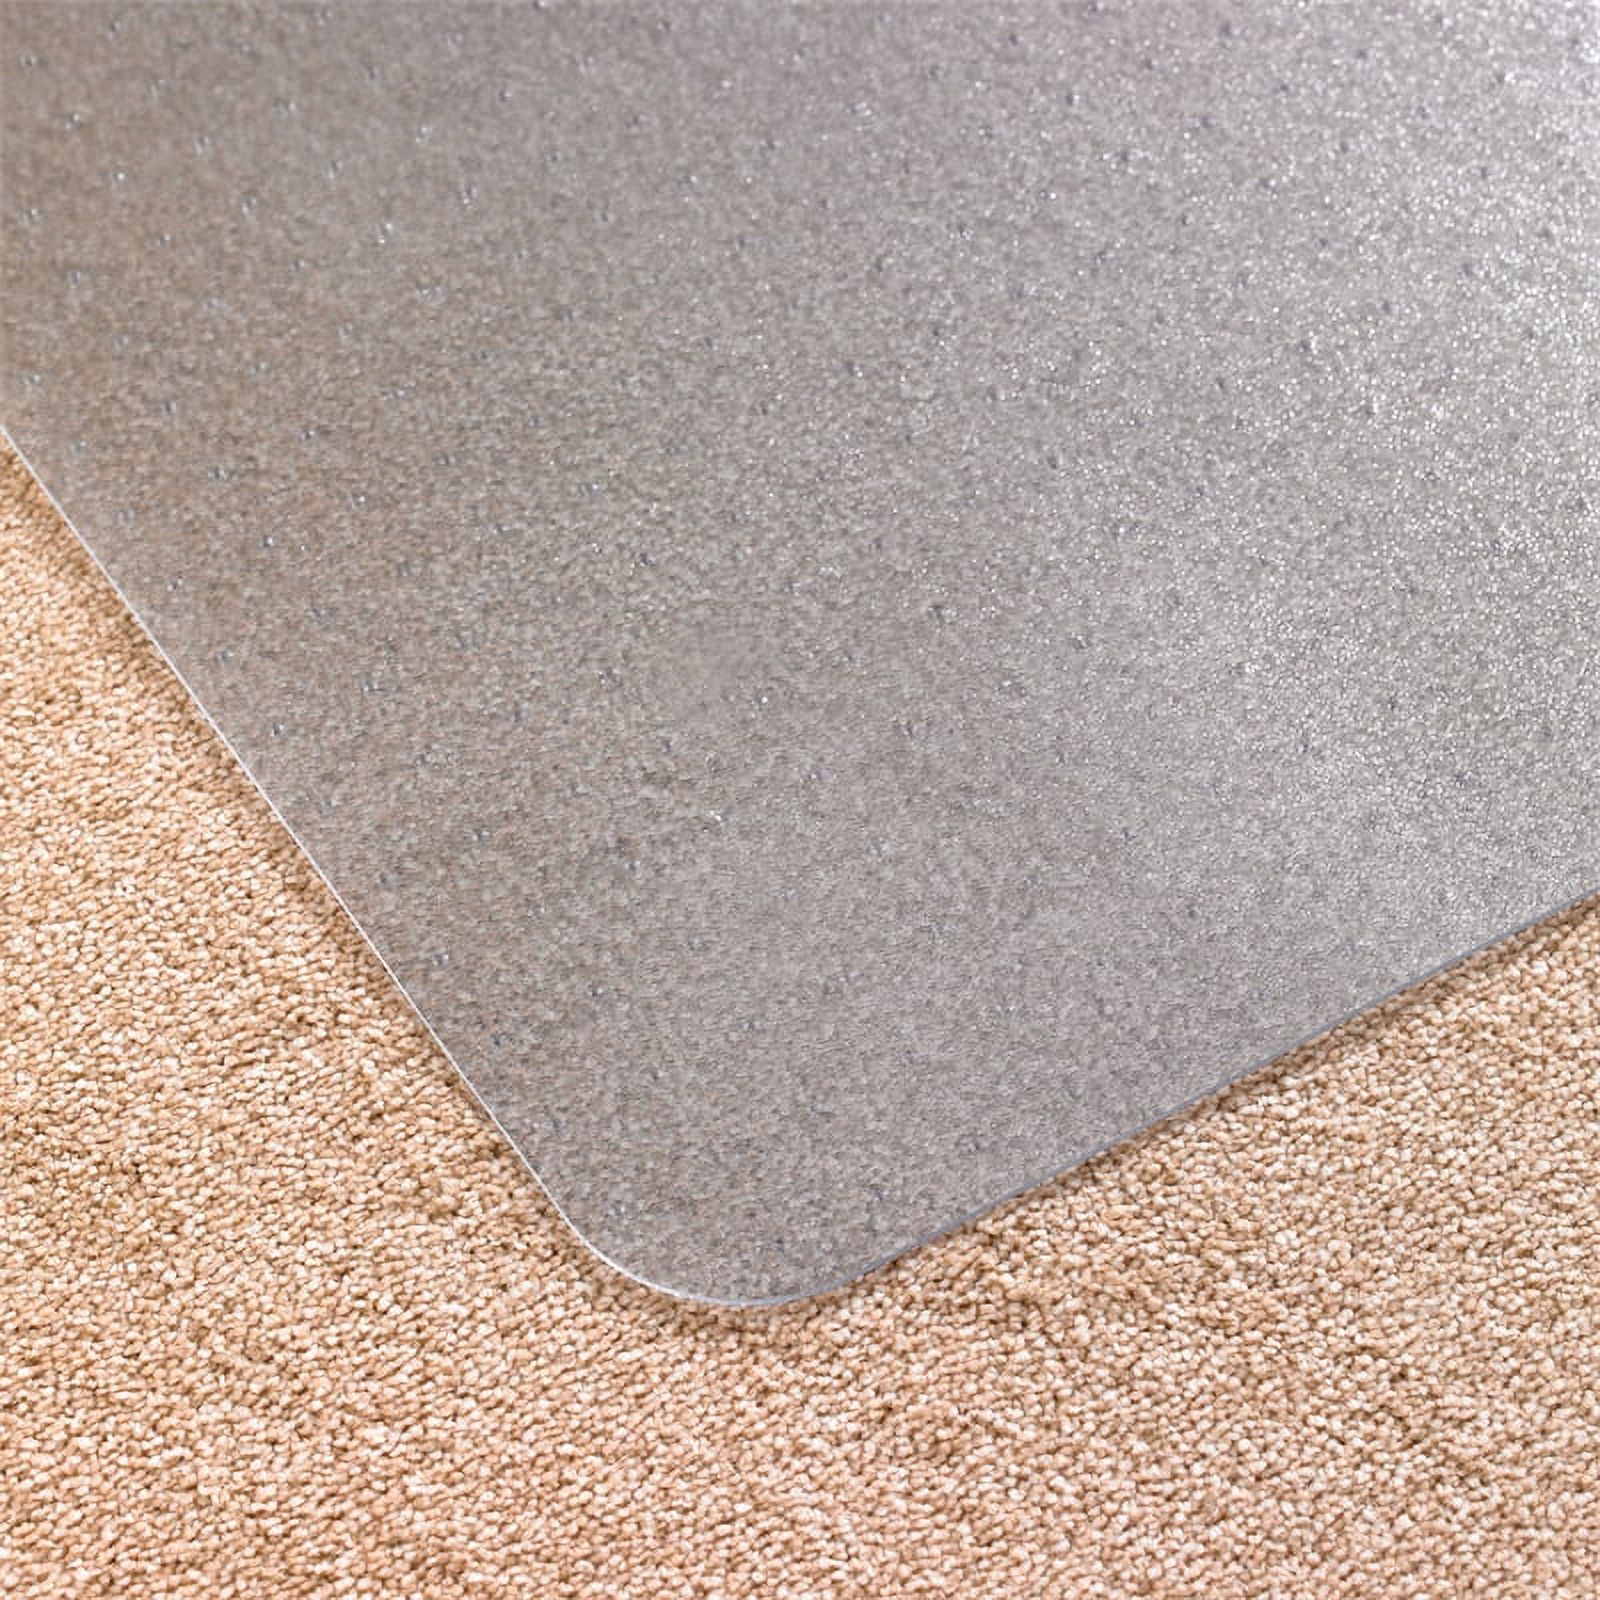 Advantagemat® Vinyl Lipped Chair Mat for Carpets up to 1/4" - 45" x 53" - image 3 of 7